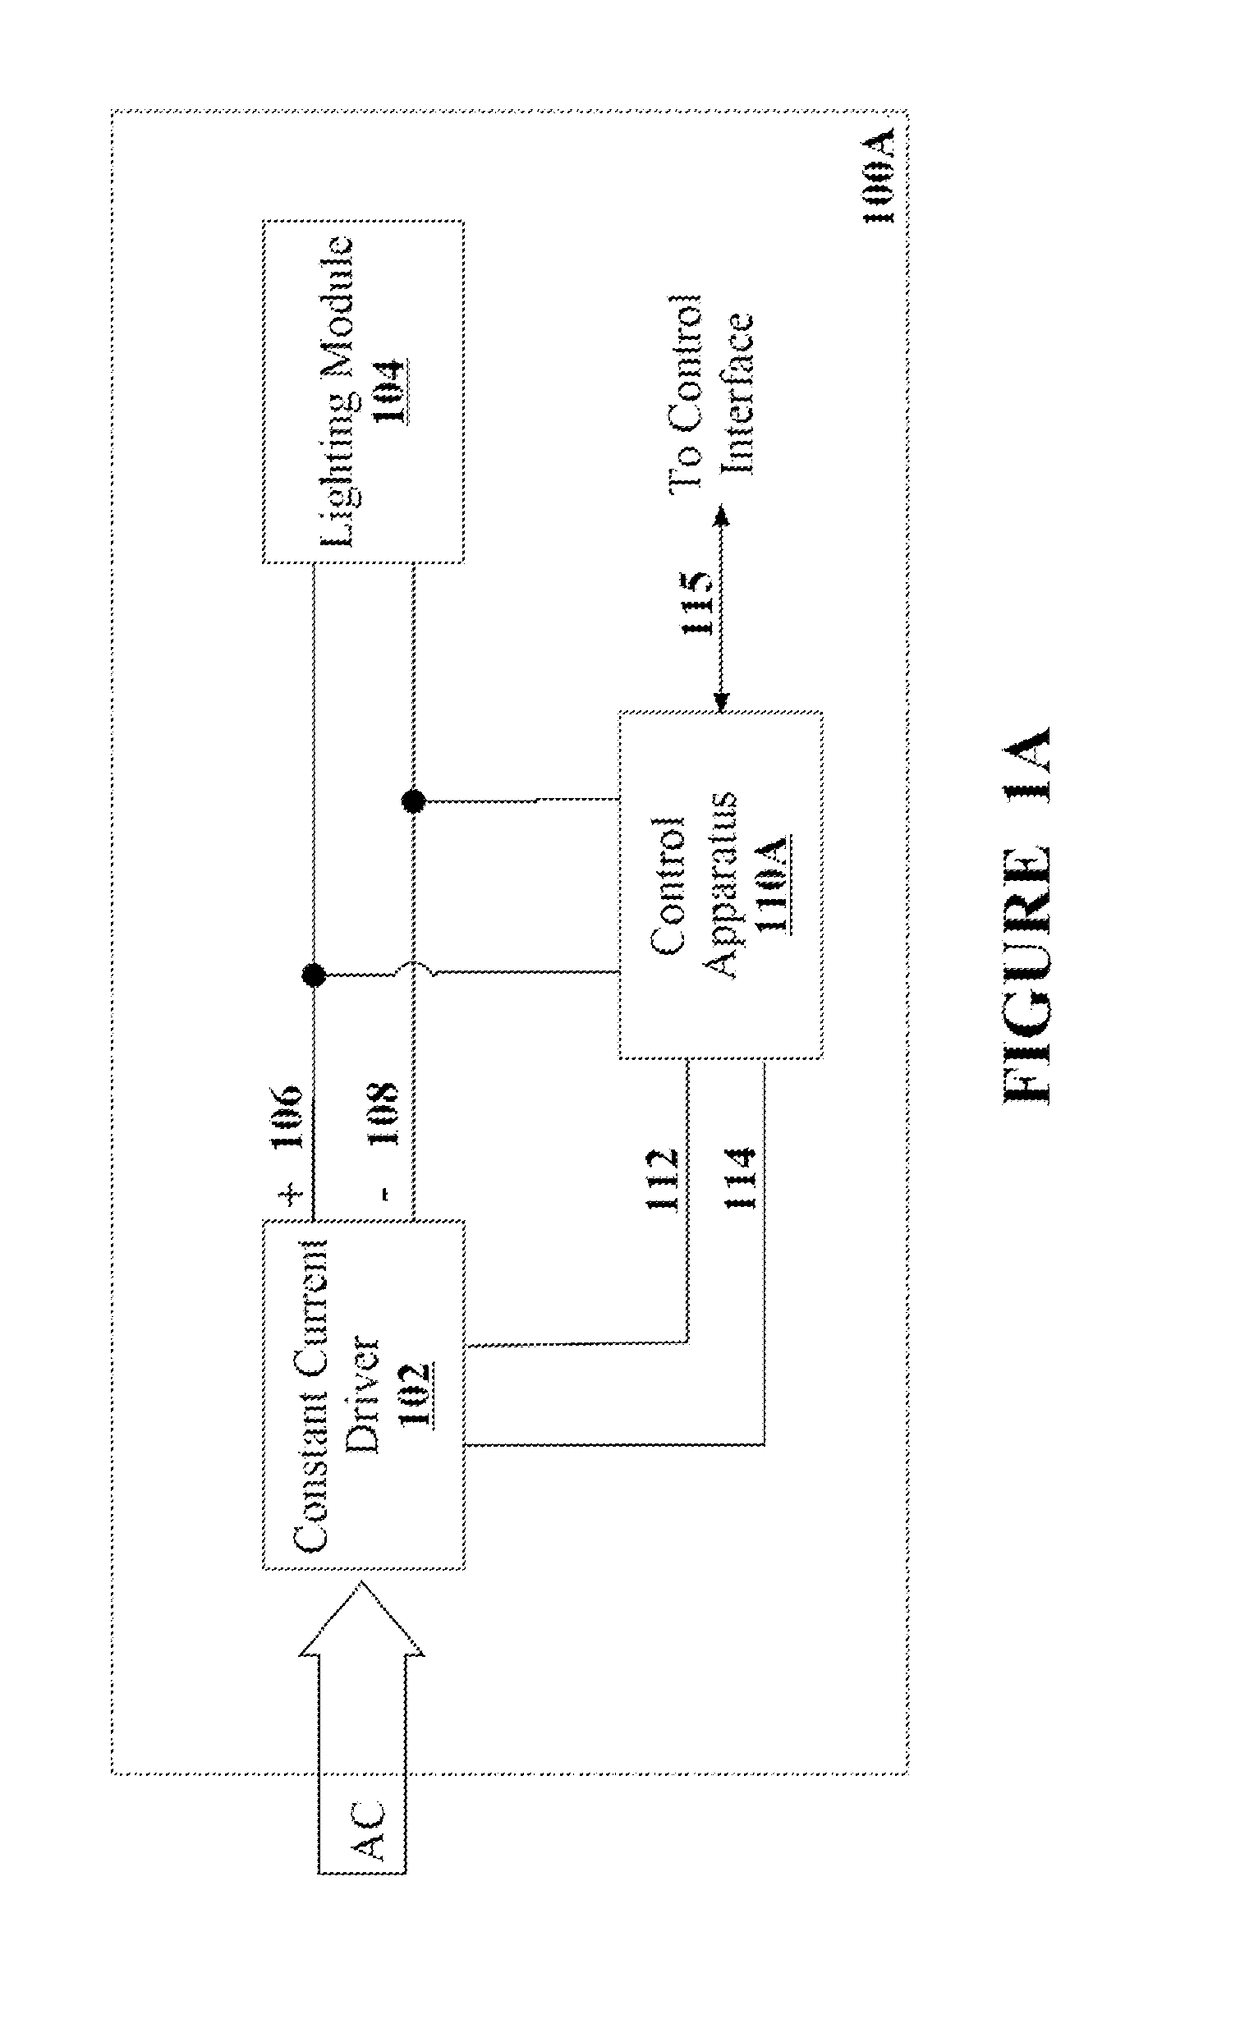 Method, system and apparatus for activating a lighting module using a buffer load module